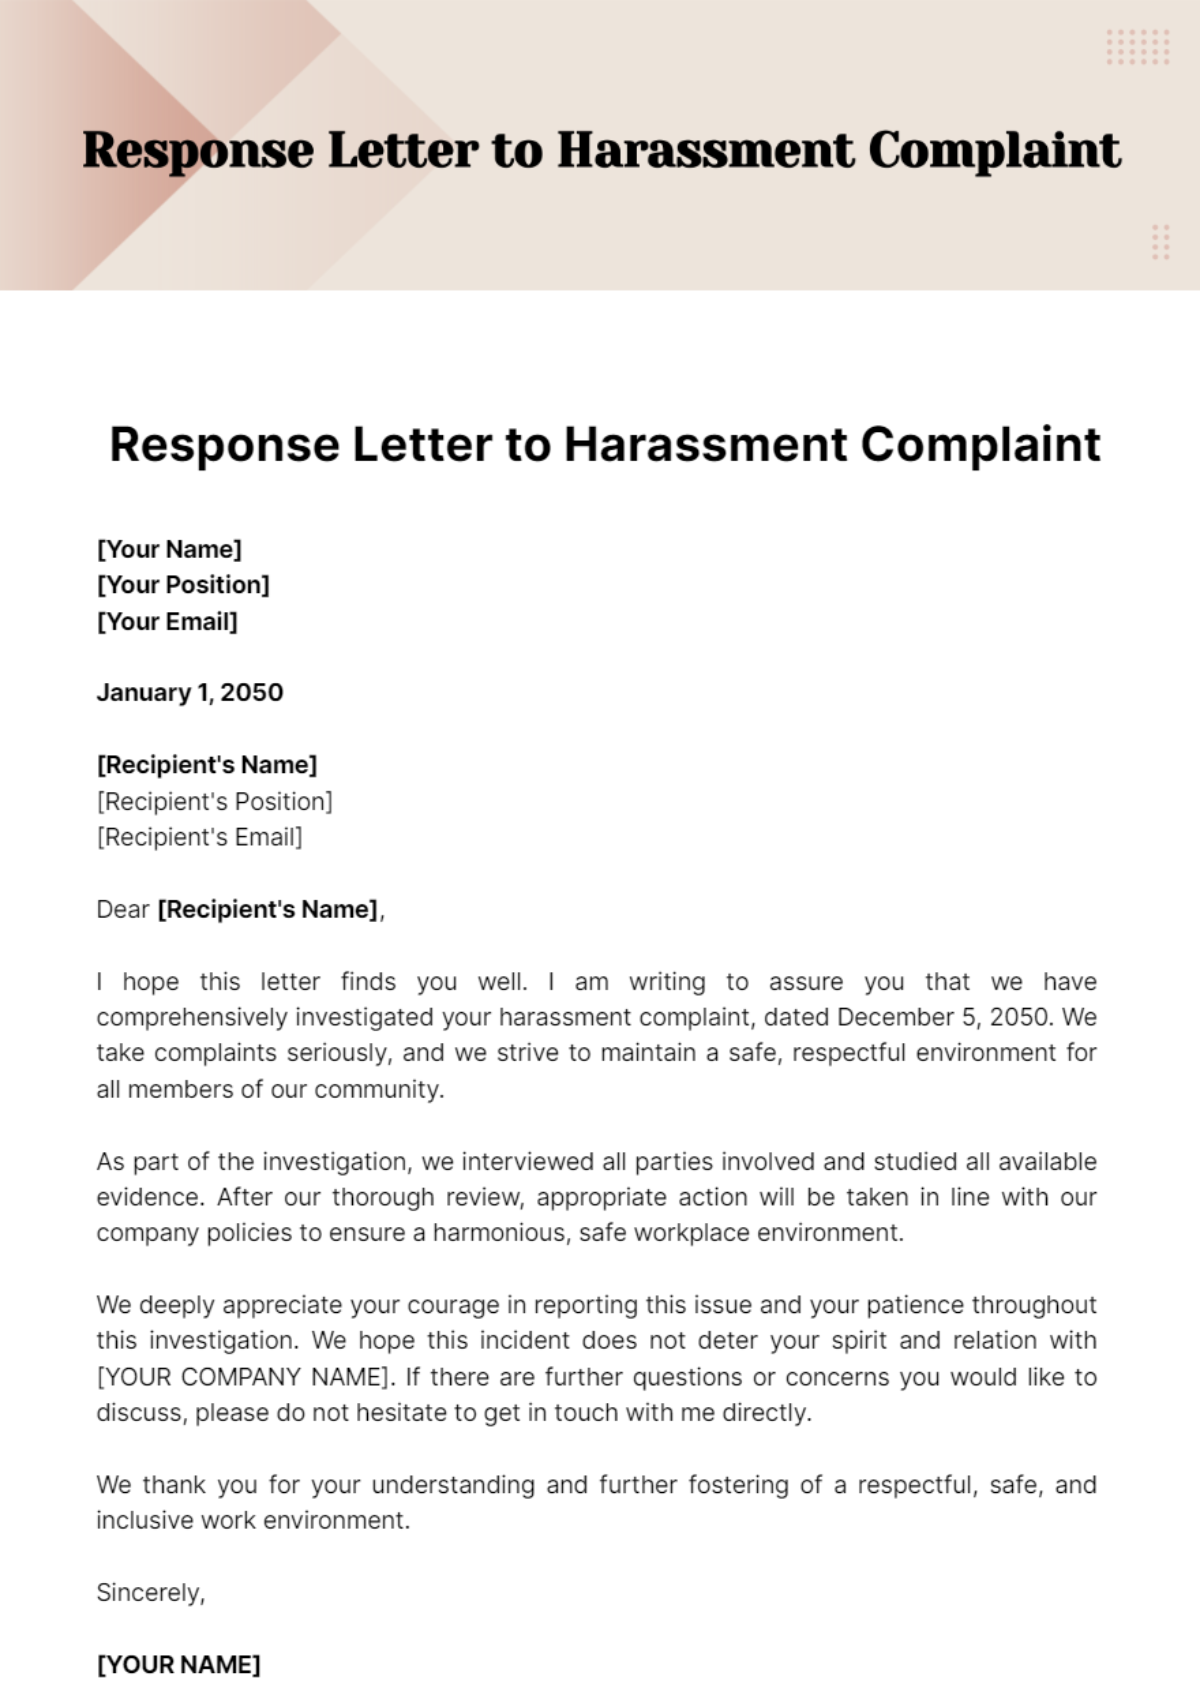 Response Letter to Harassment Complaint Template